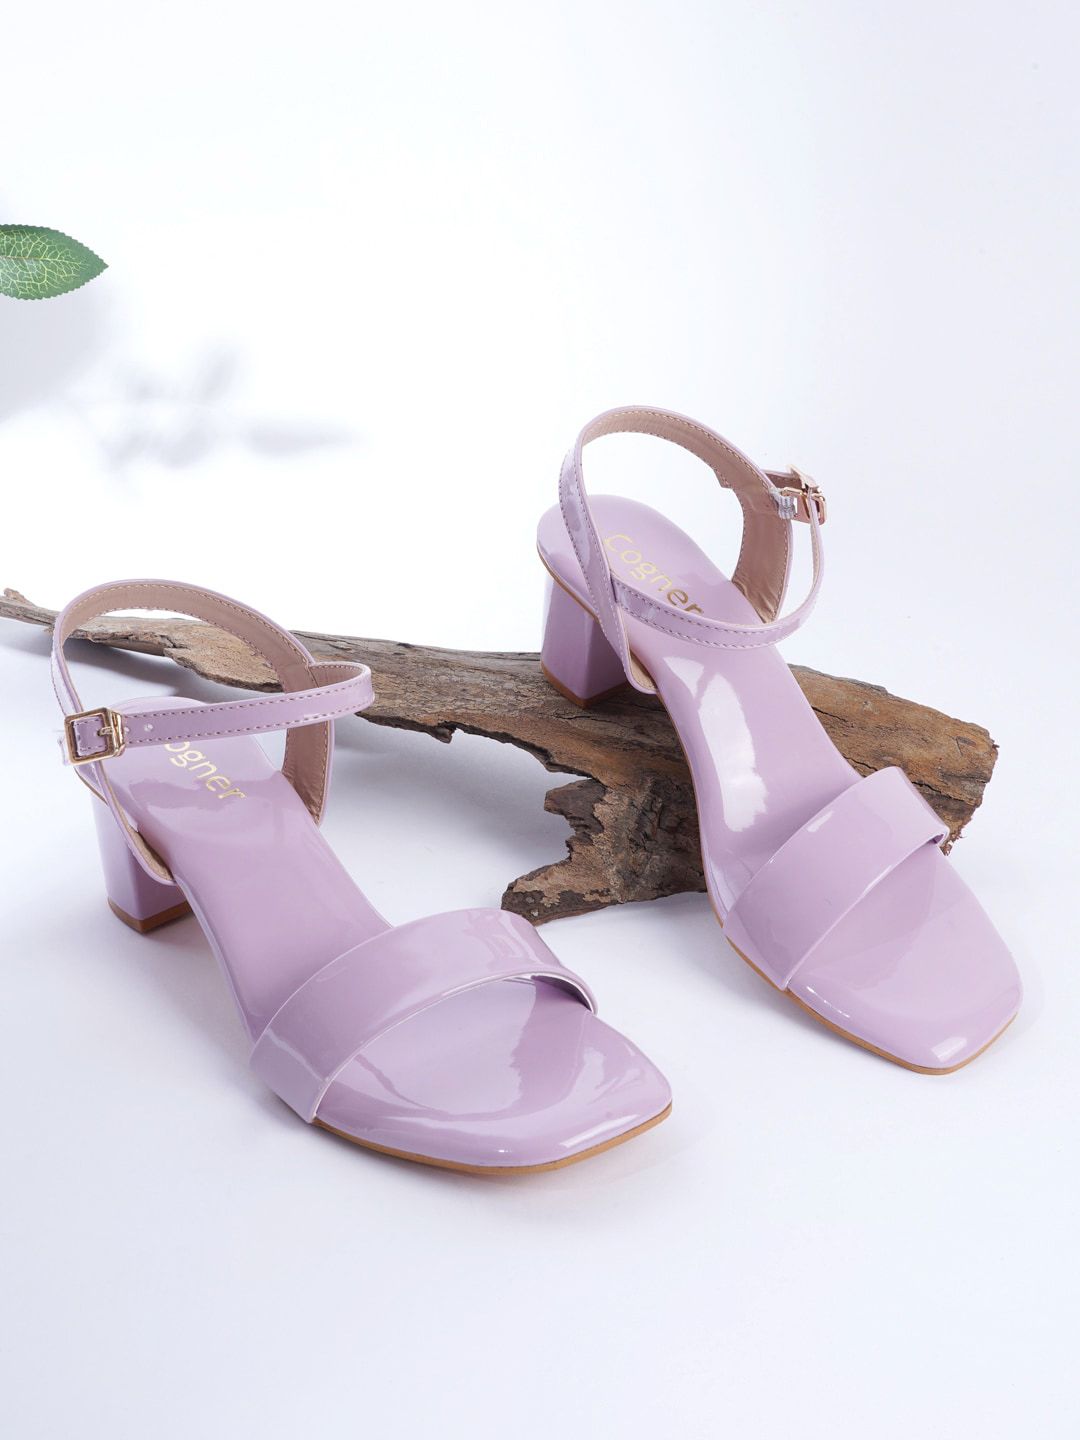 Cogner Purple Printed Party Block Sandals with Buckles Price in India